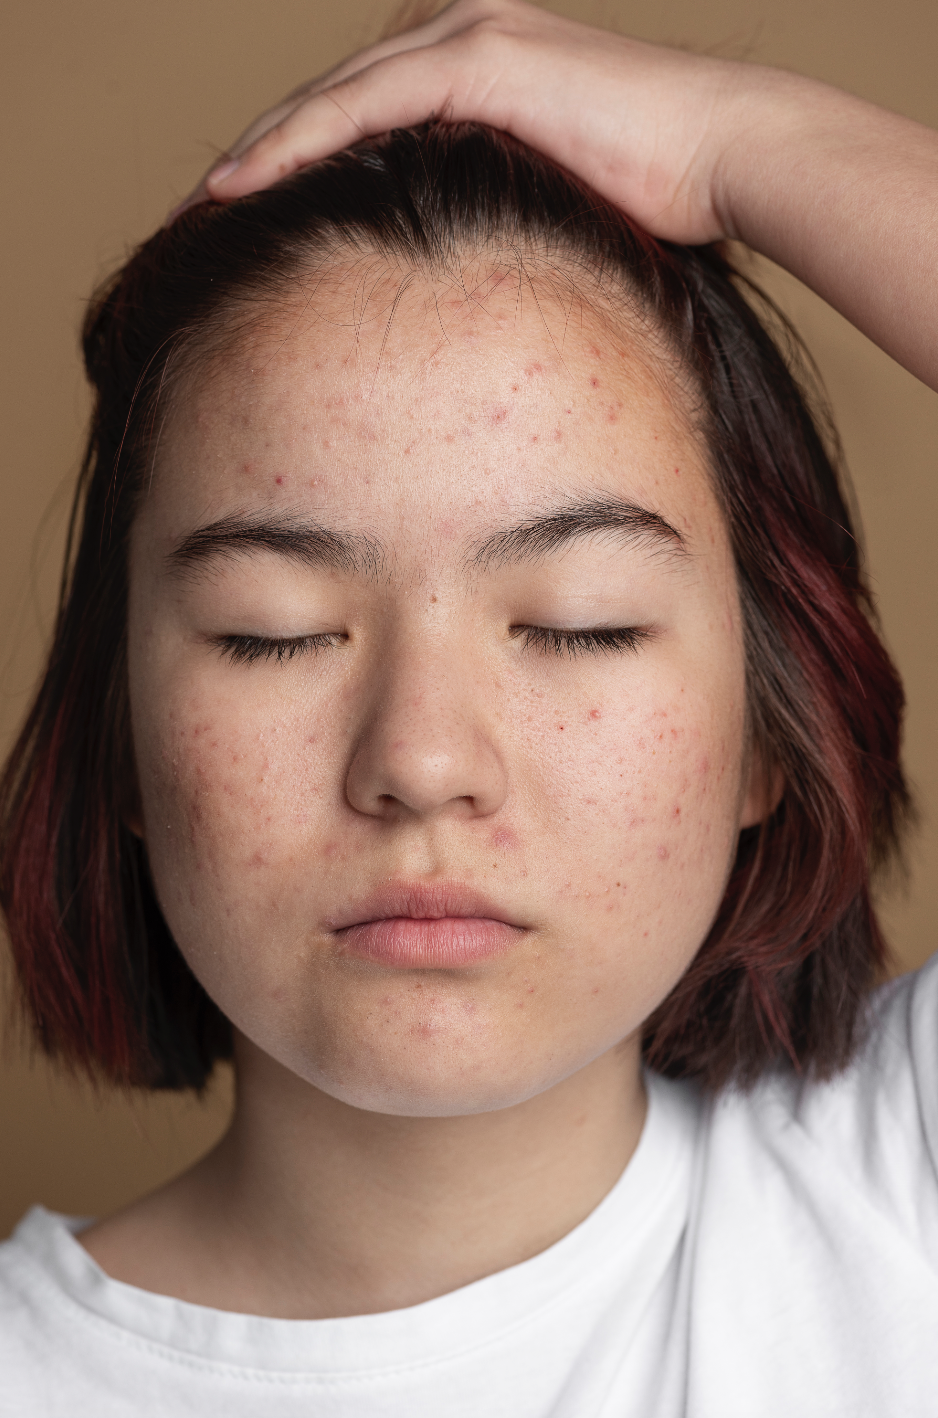 Acne Scars and Skin Discoloration